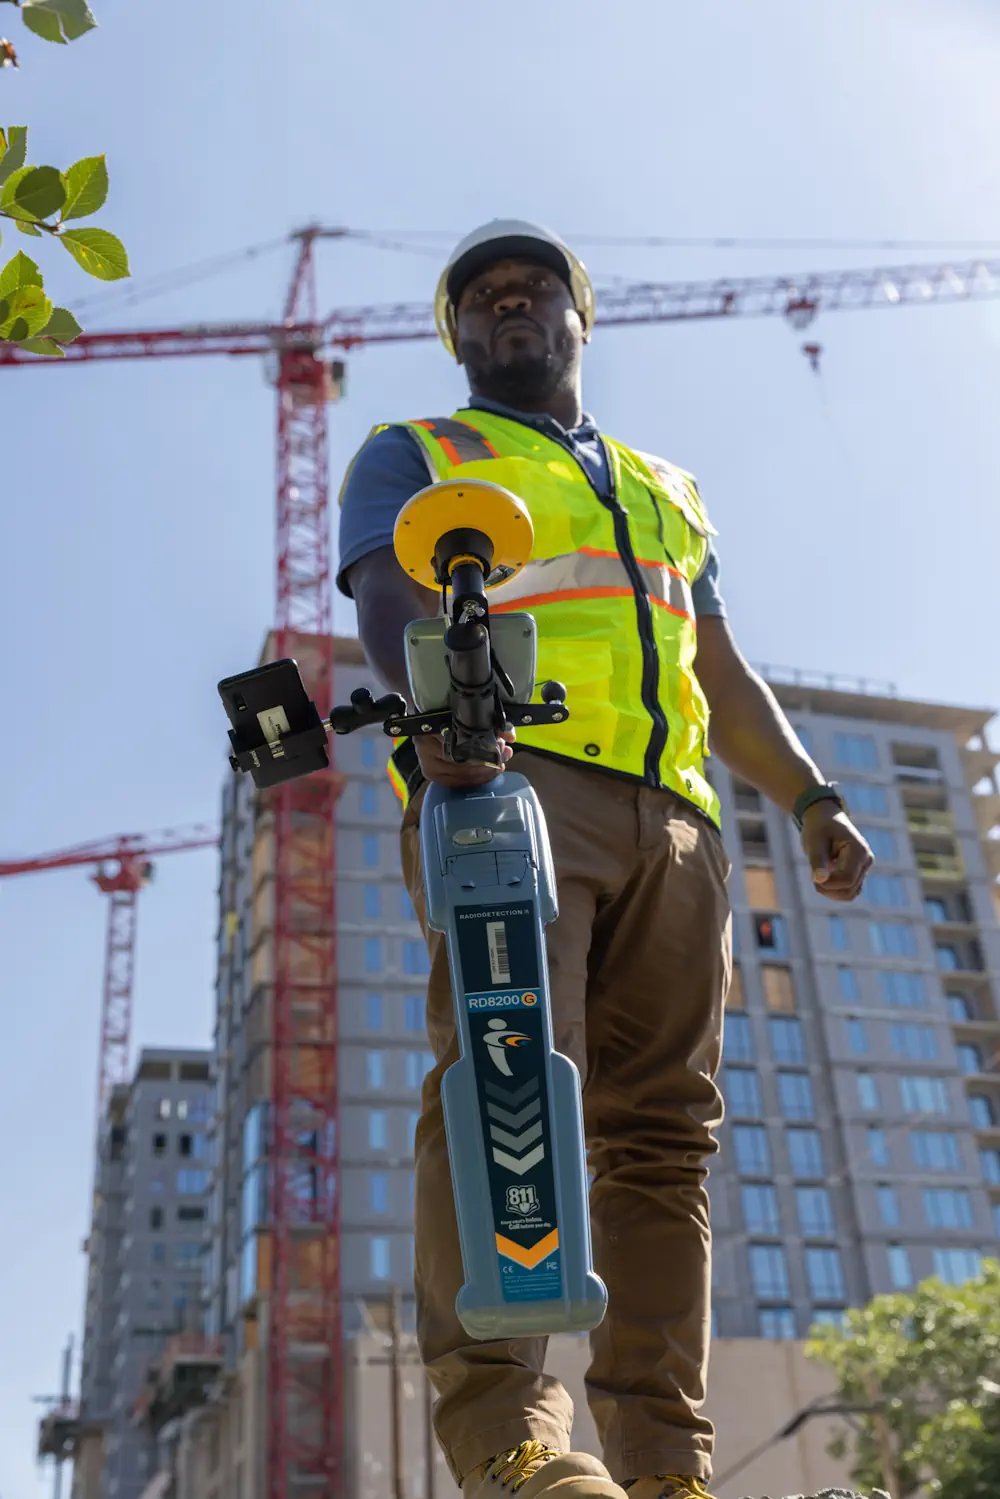 Trimble And Radiodetection Combine Survey-Grade Positioning With Underground Utilities Locating Measurement Workflows